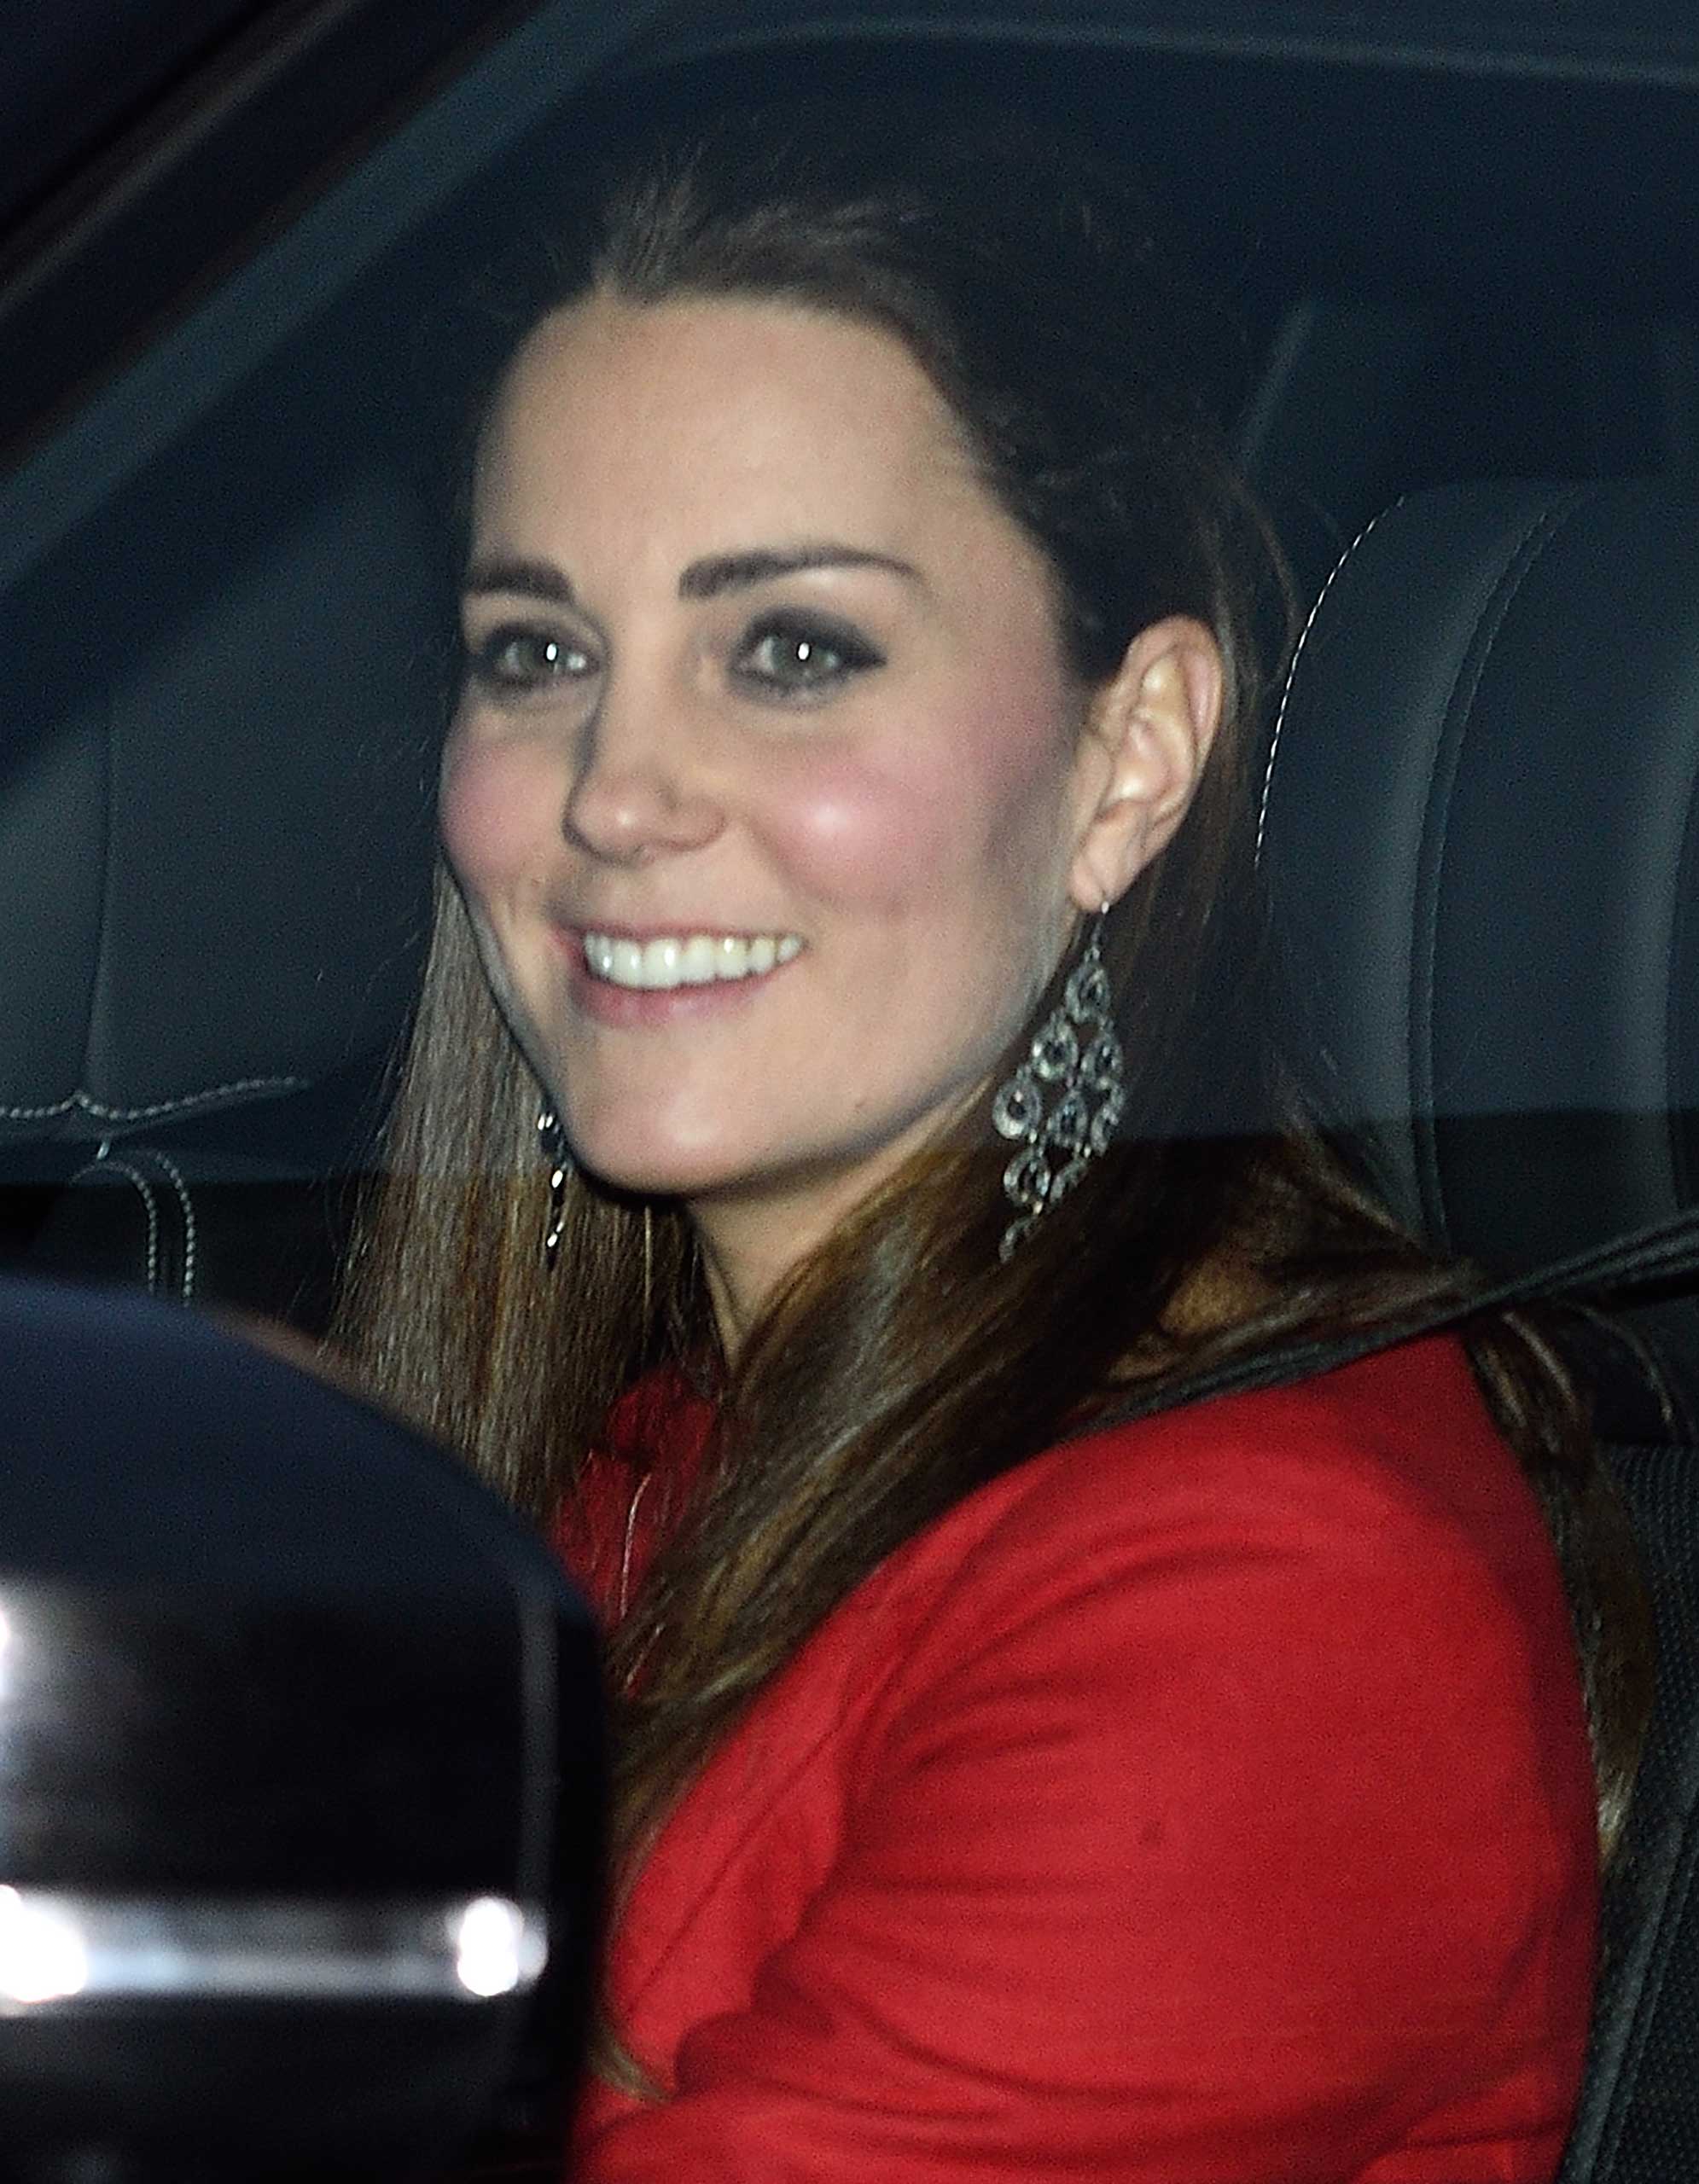 The Duke and Duchess of Cambridge depart from the Buckingham Palace Pre-Christmas Lunch